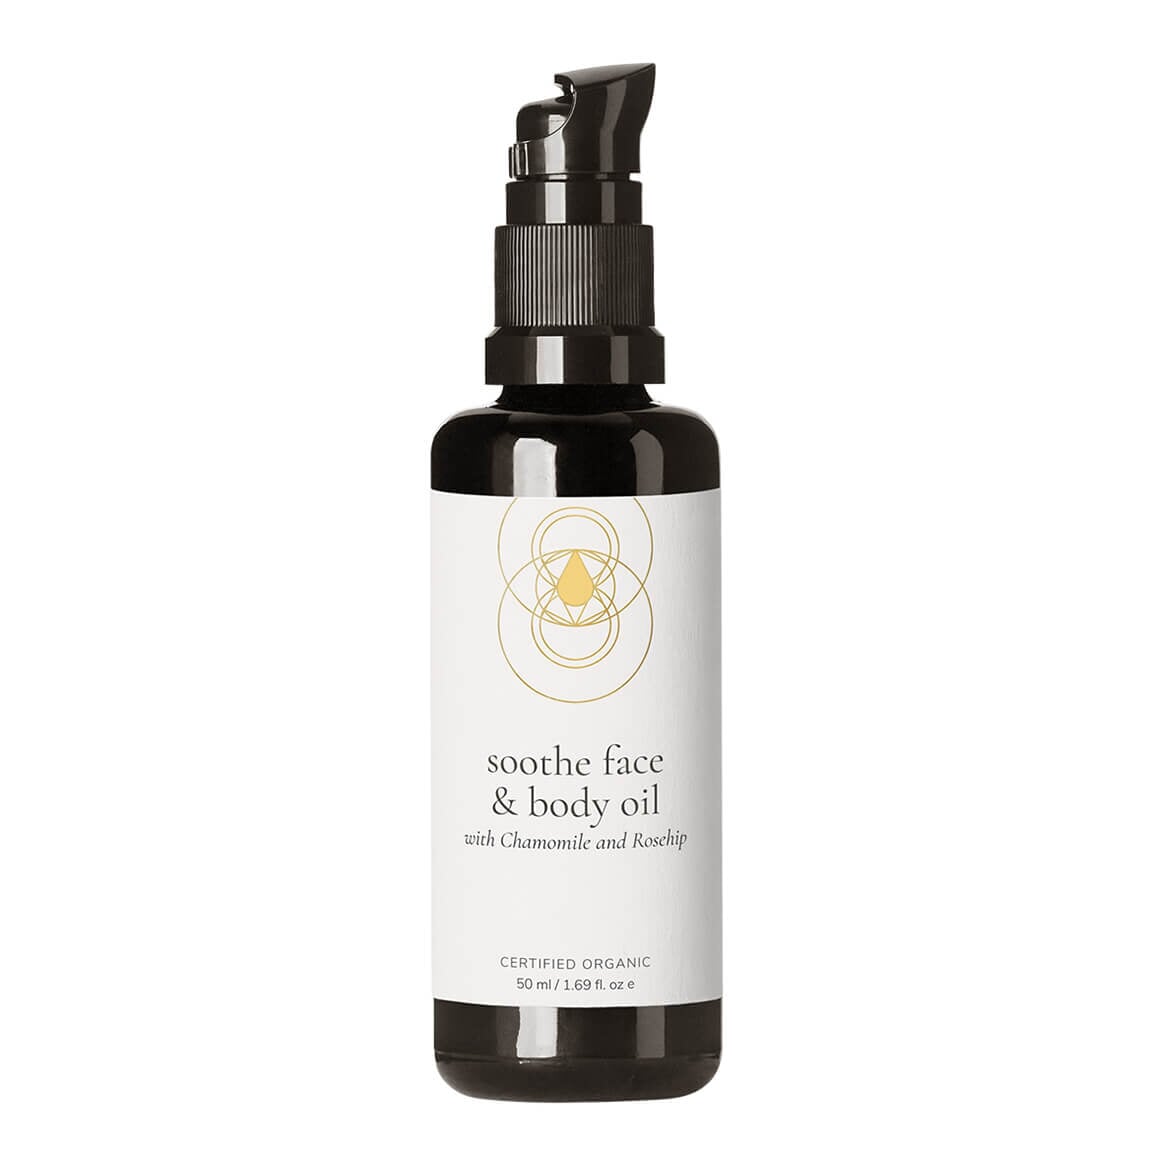 Soothe Face & Body Oil Other Synthesis Organics 